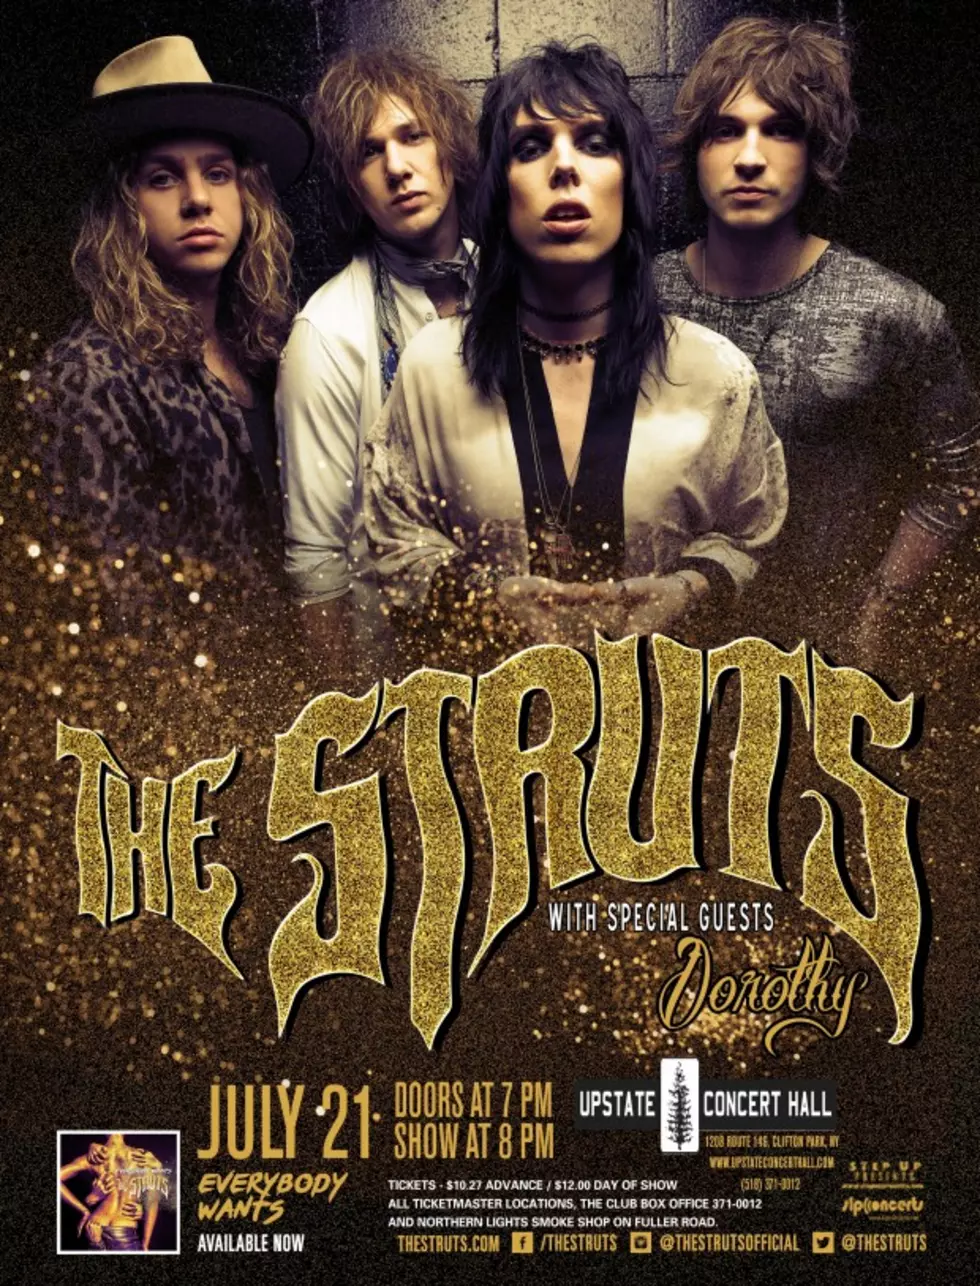 The Struts Play Upstate Concert Hall July 21